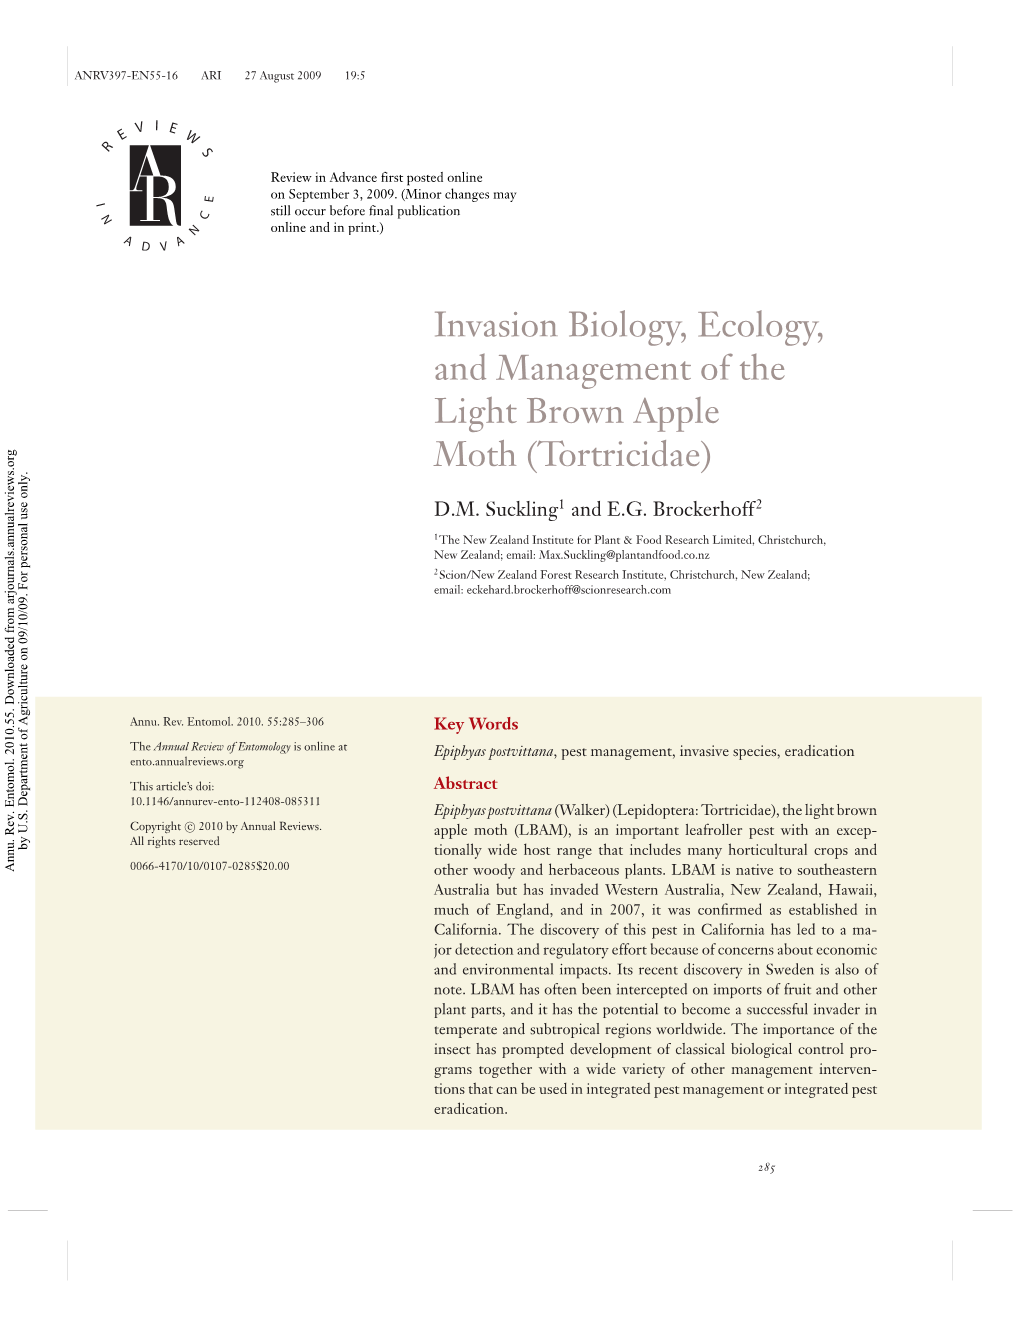 Invasion Biology, Ecology, and Management of the Light Brown Apple Moth (Tortricidae)